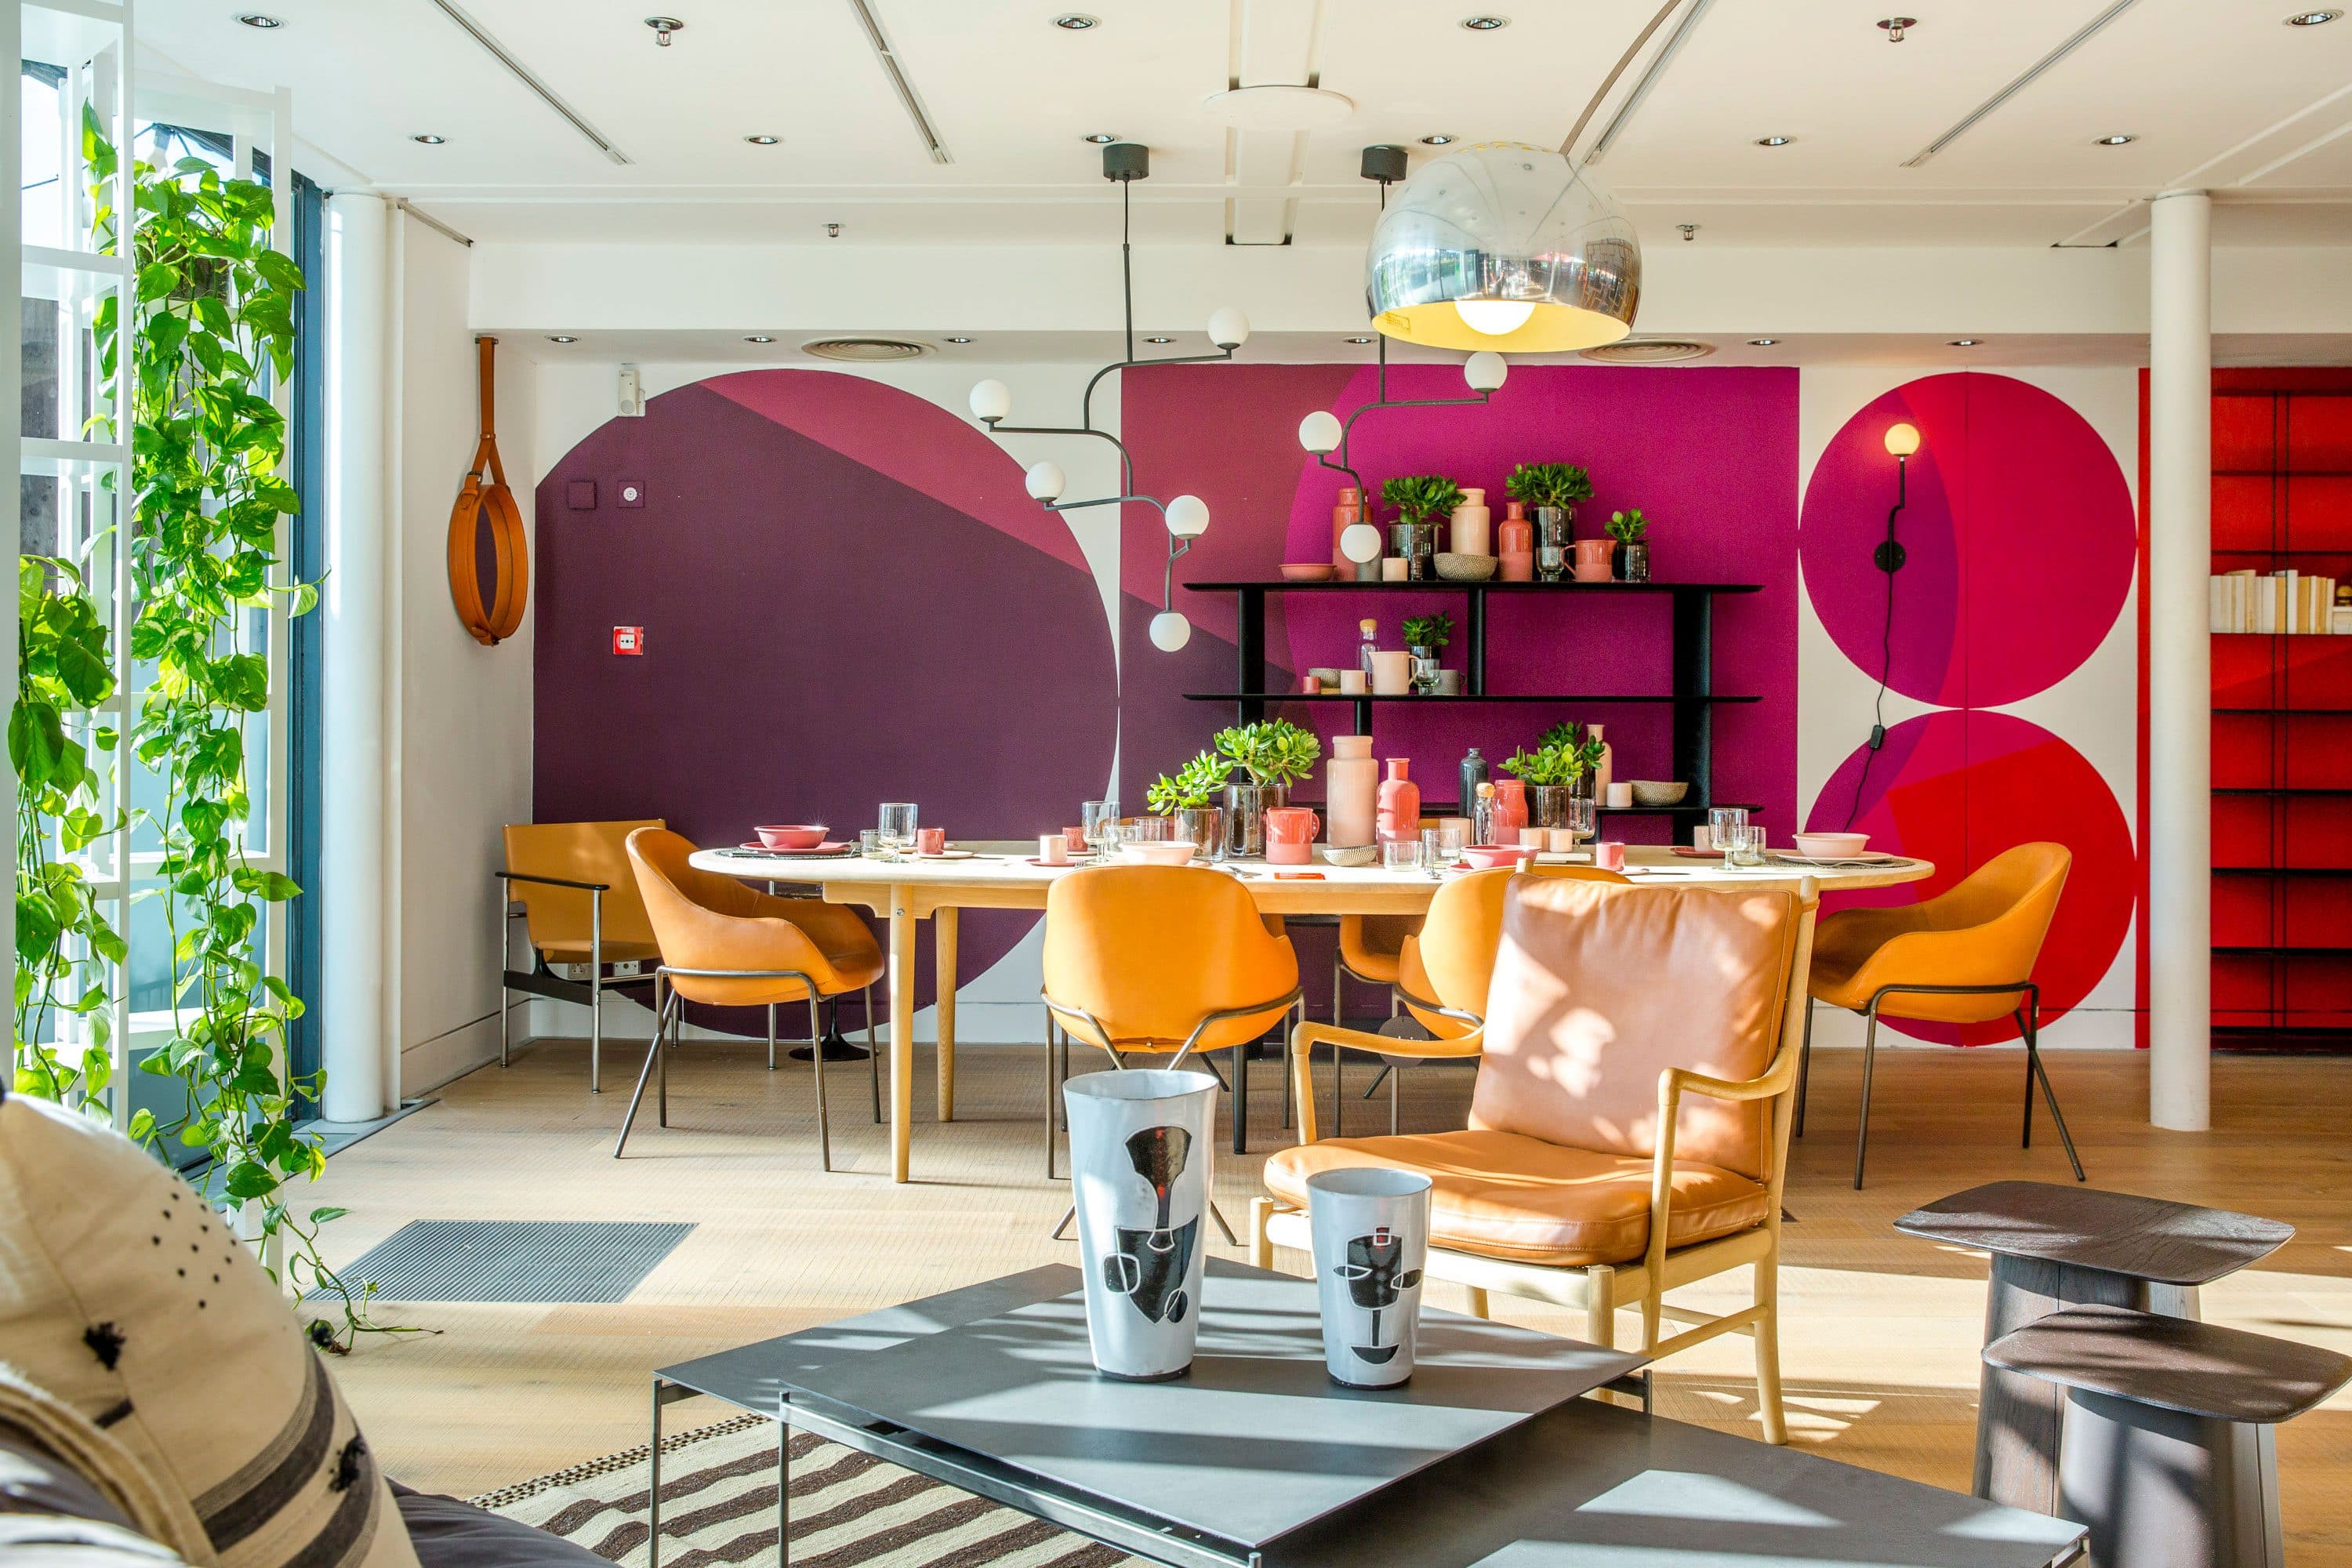 Colourful decorative pieces and wall art inside The Conran Shop